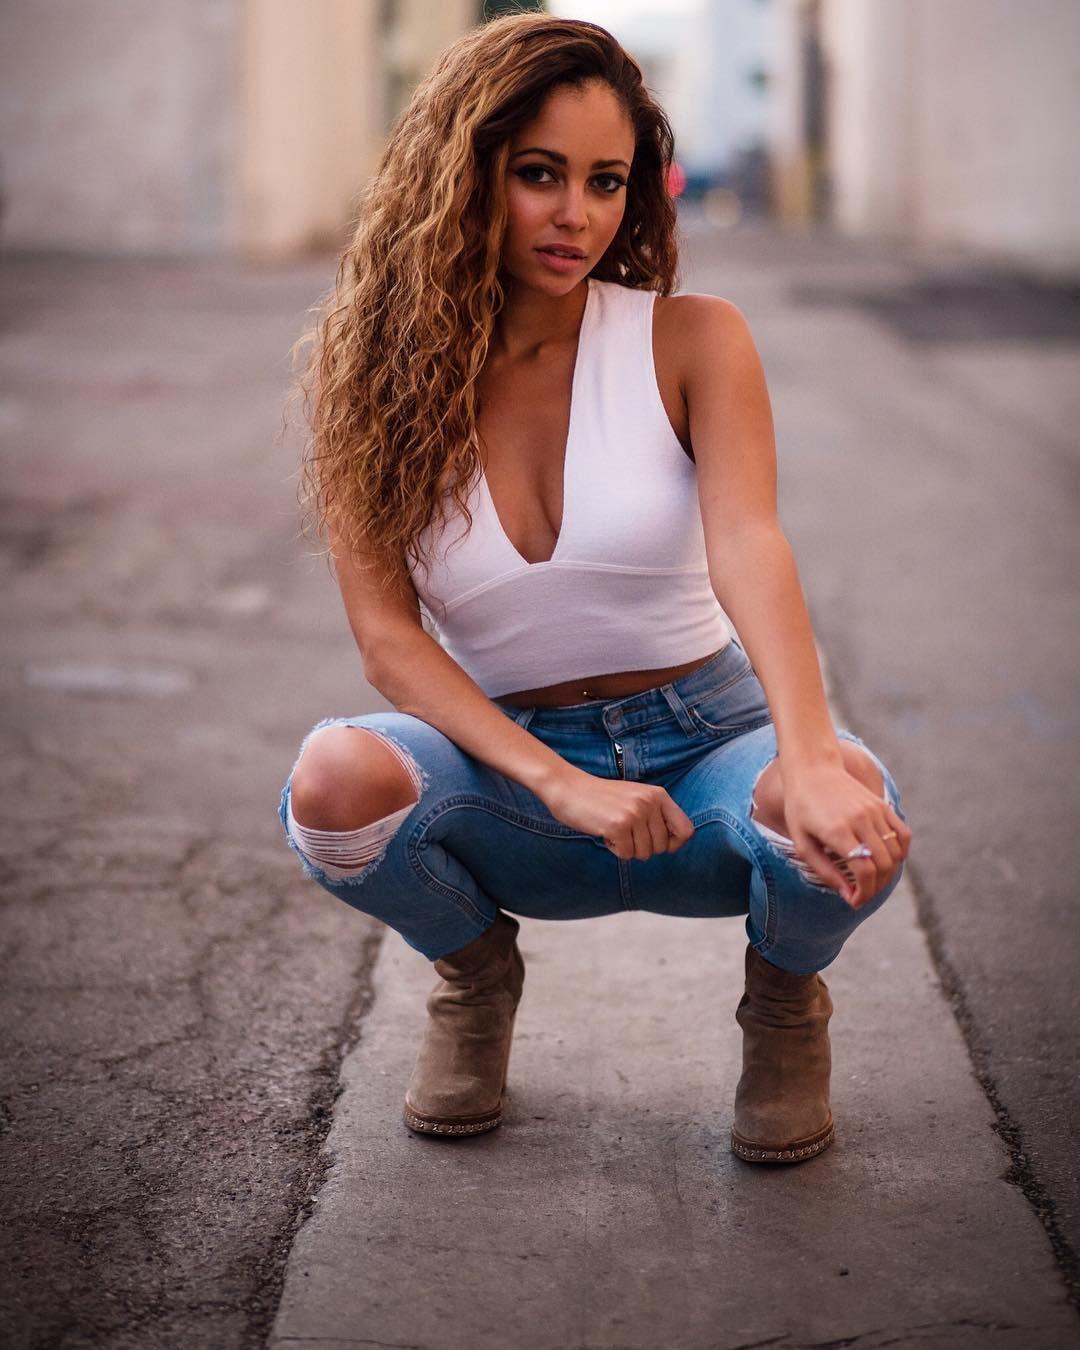 Hot Picture of Vanessa Morgan From Riverdale